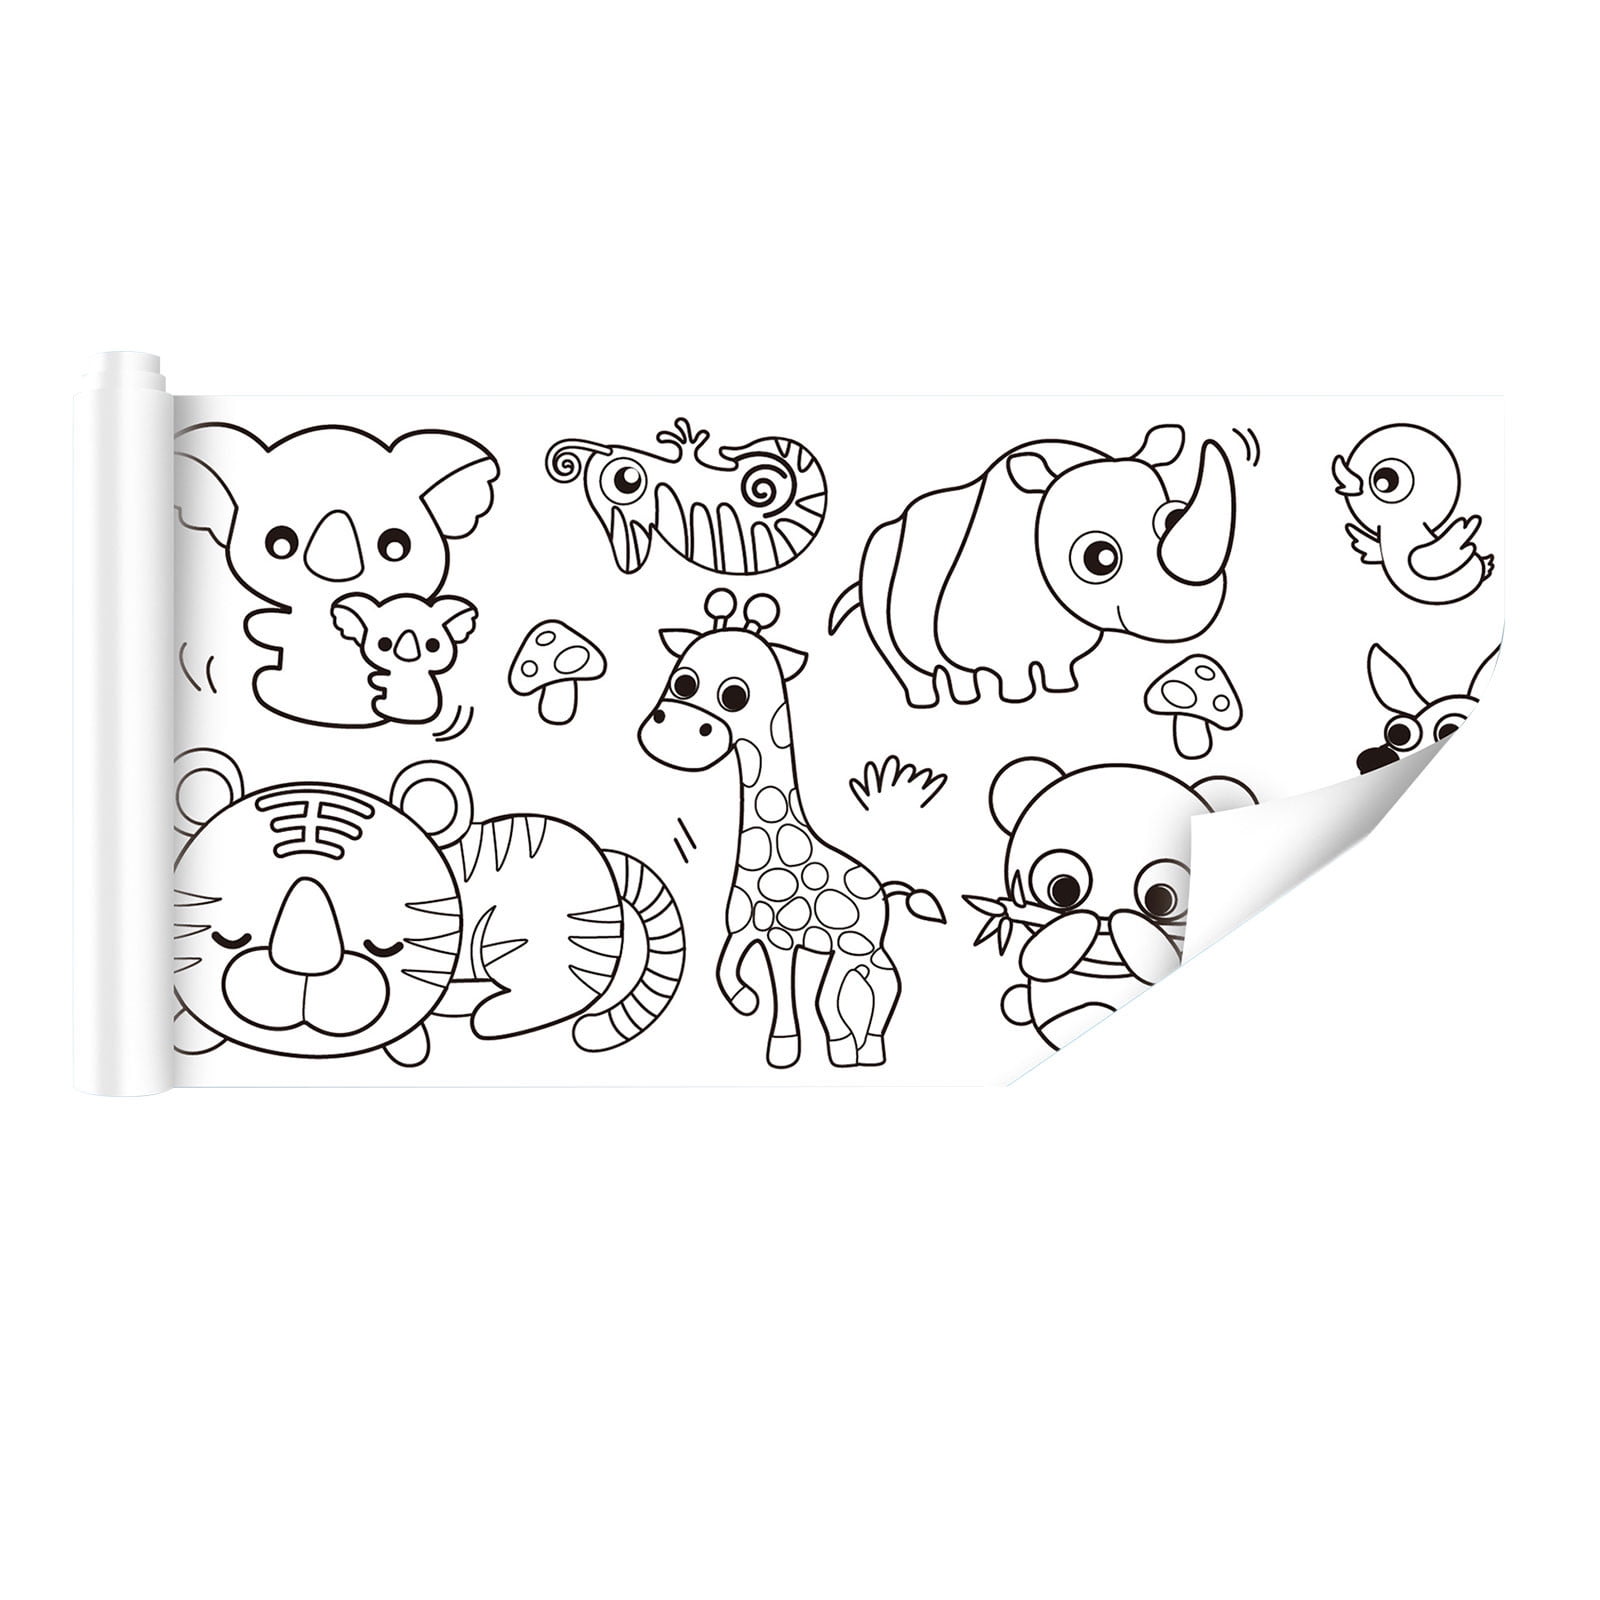  TEHAUX 2 Rolls Roll Graffiti Tracing Paper Art Paper for Sketch  Paper for Drawing Paper Drawing for Kids Coloring Painting Decal Space  Coloring Poster Toddler Picture Confetti : Toys & Games